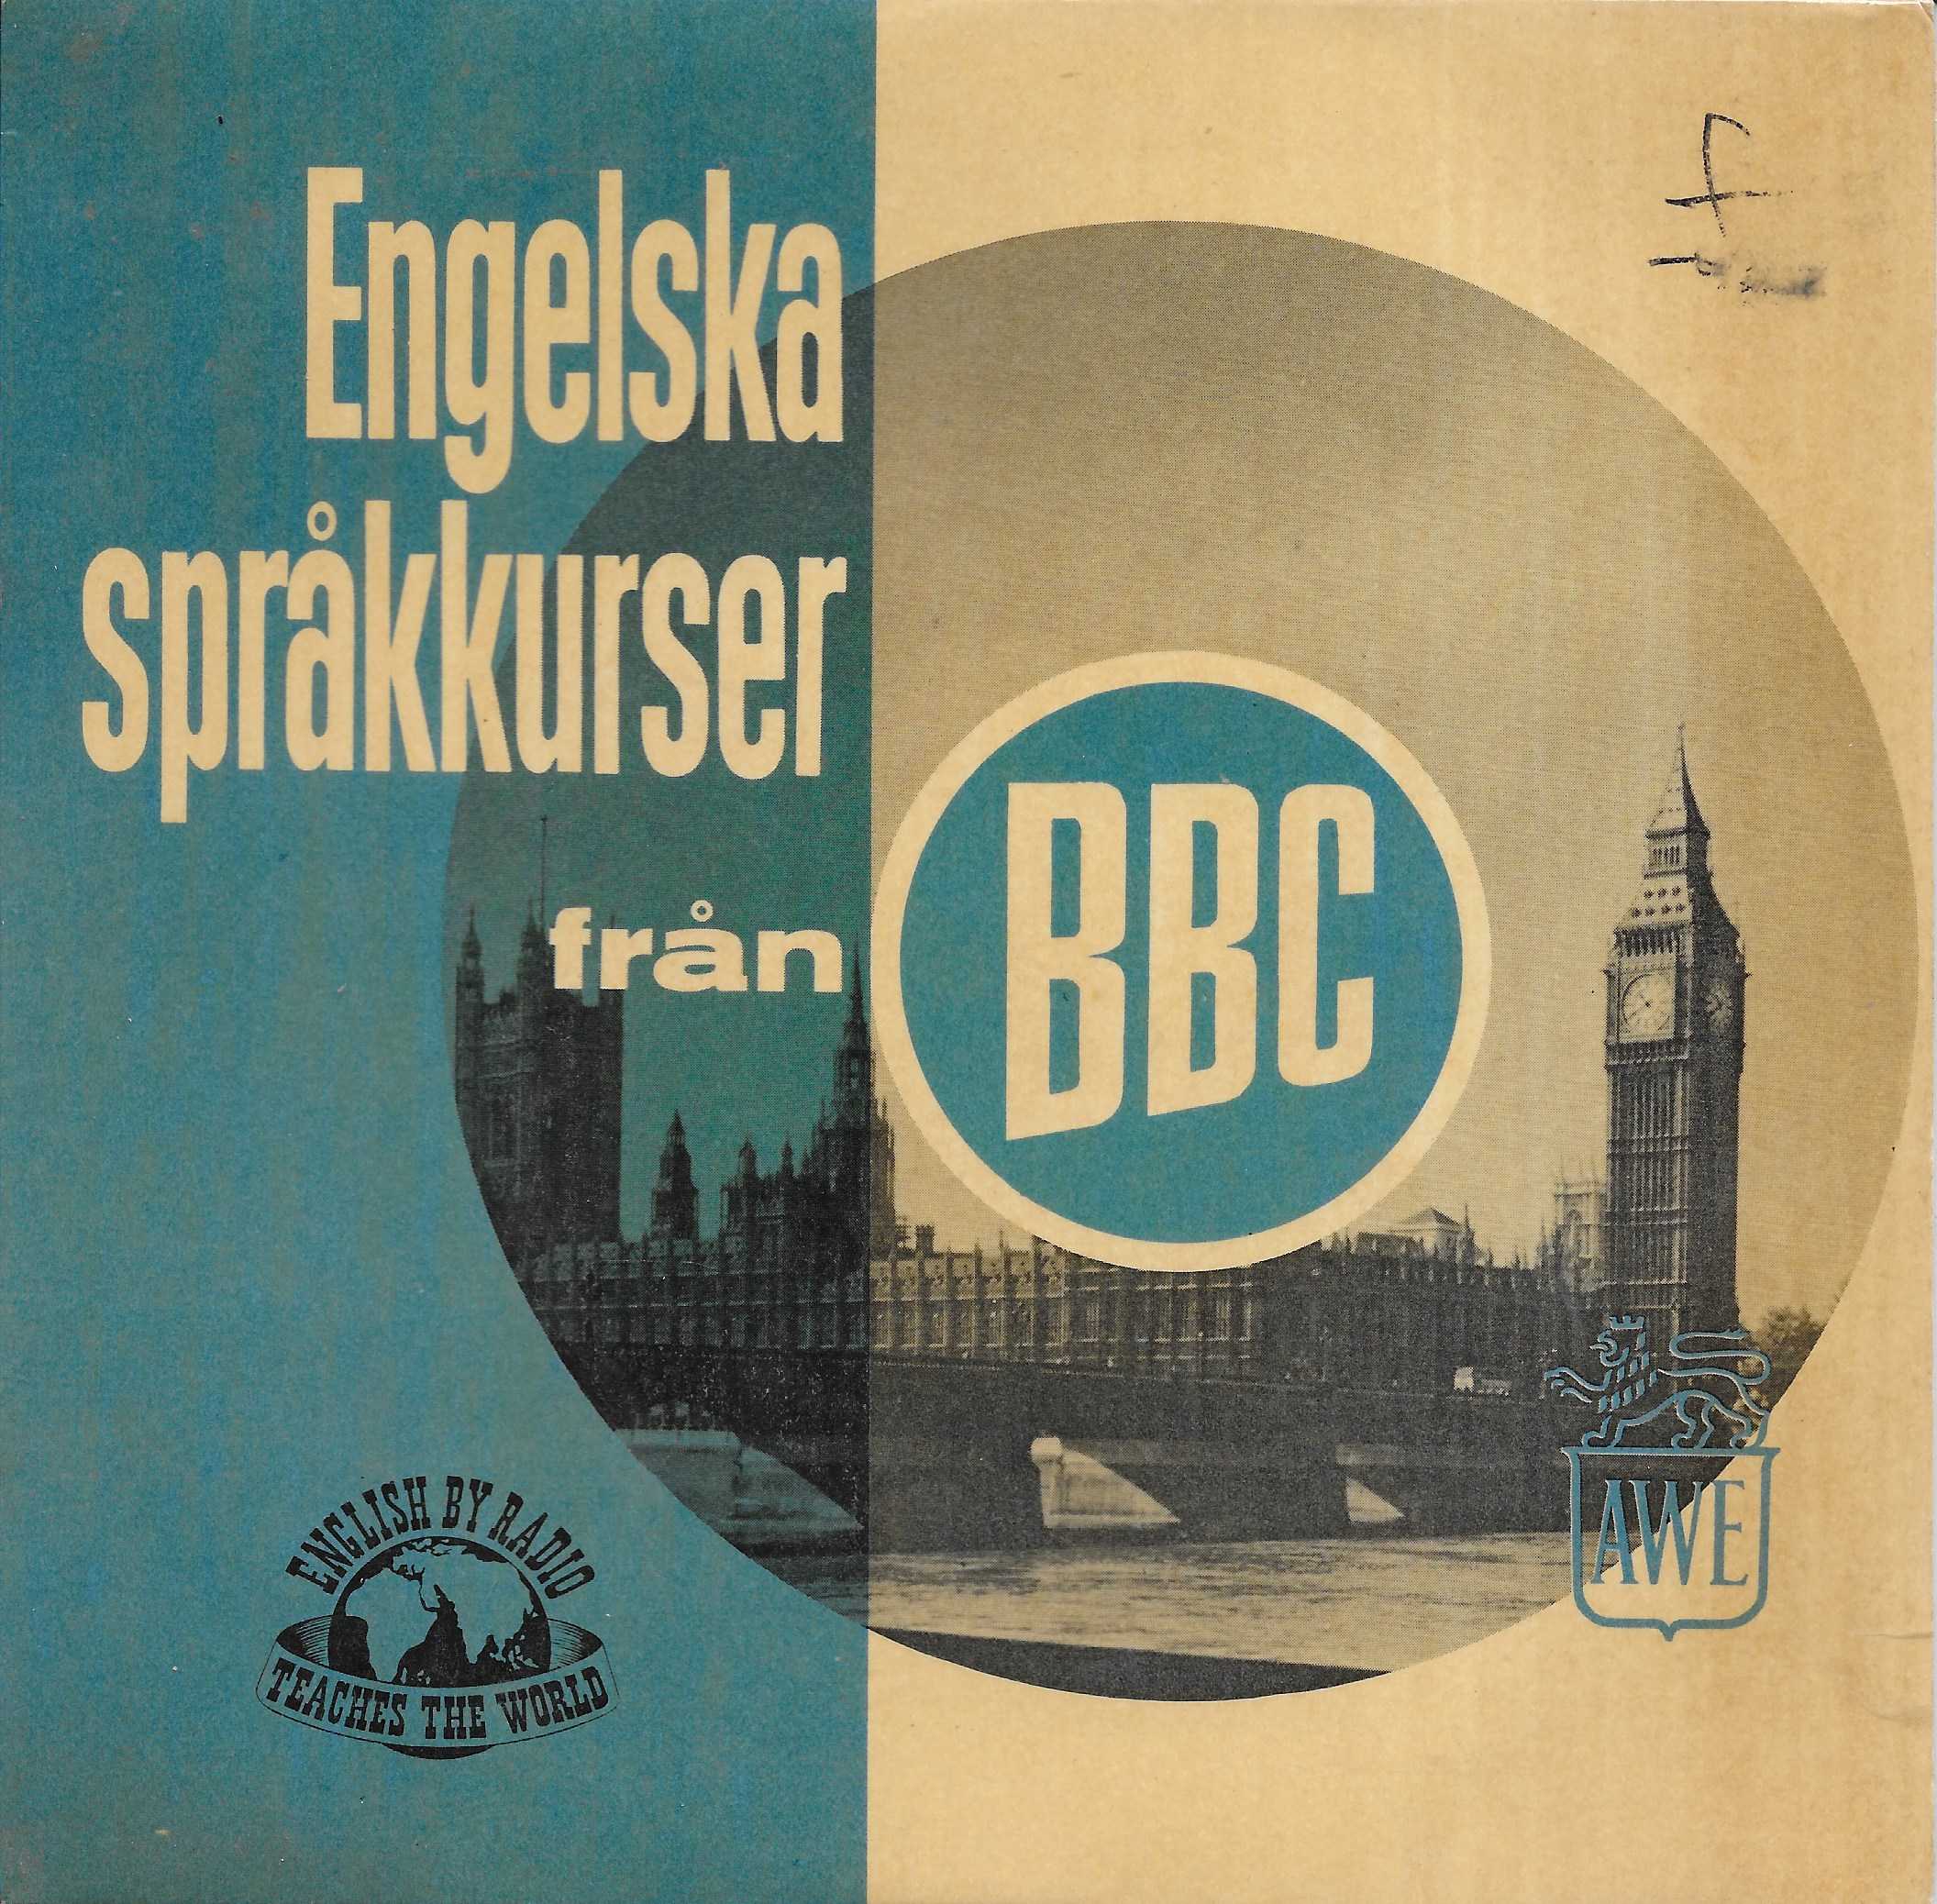 Picture of Provskiva by artist Unknown from the BBC singles - Records and Tapes library